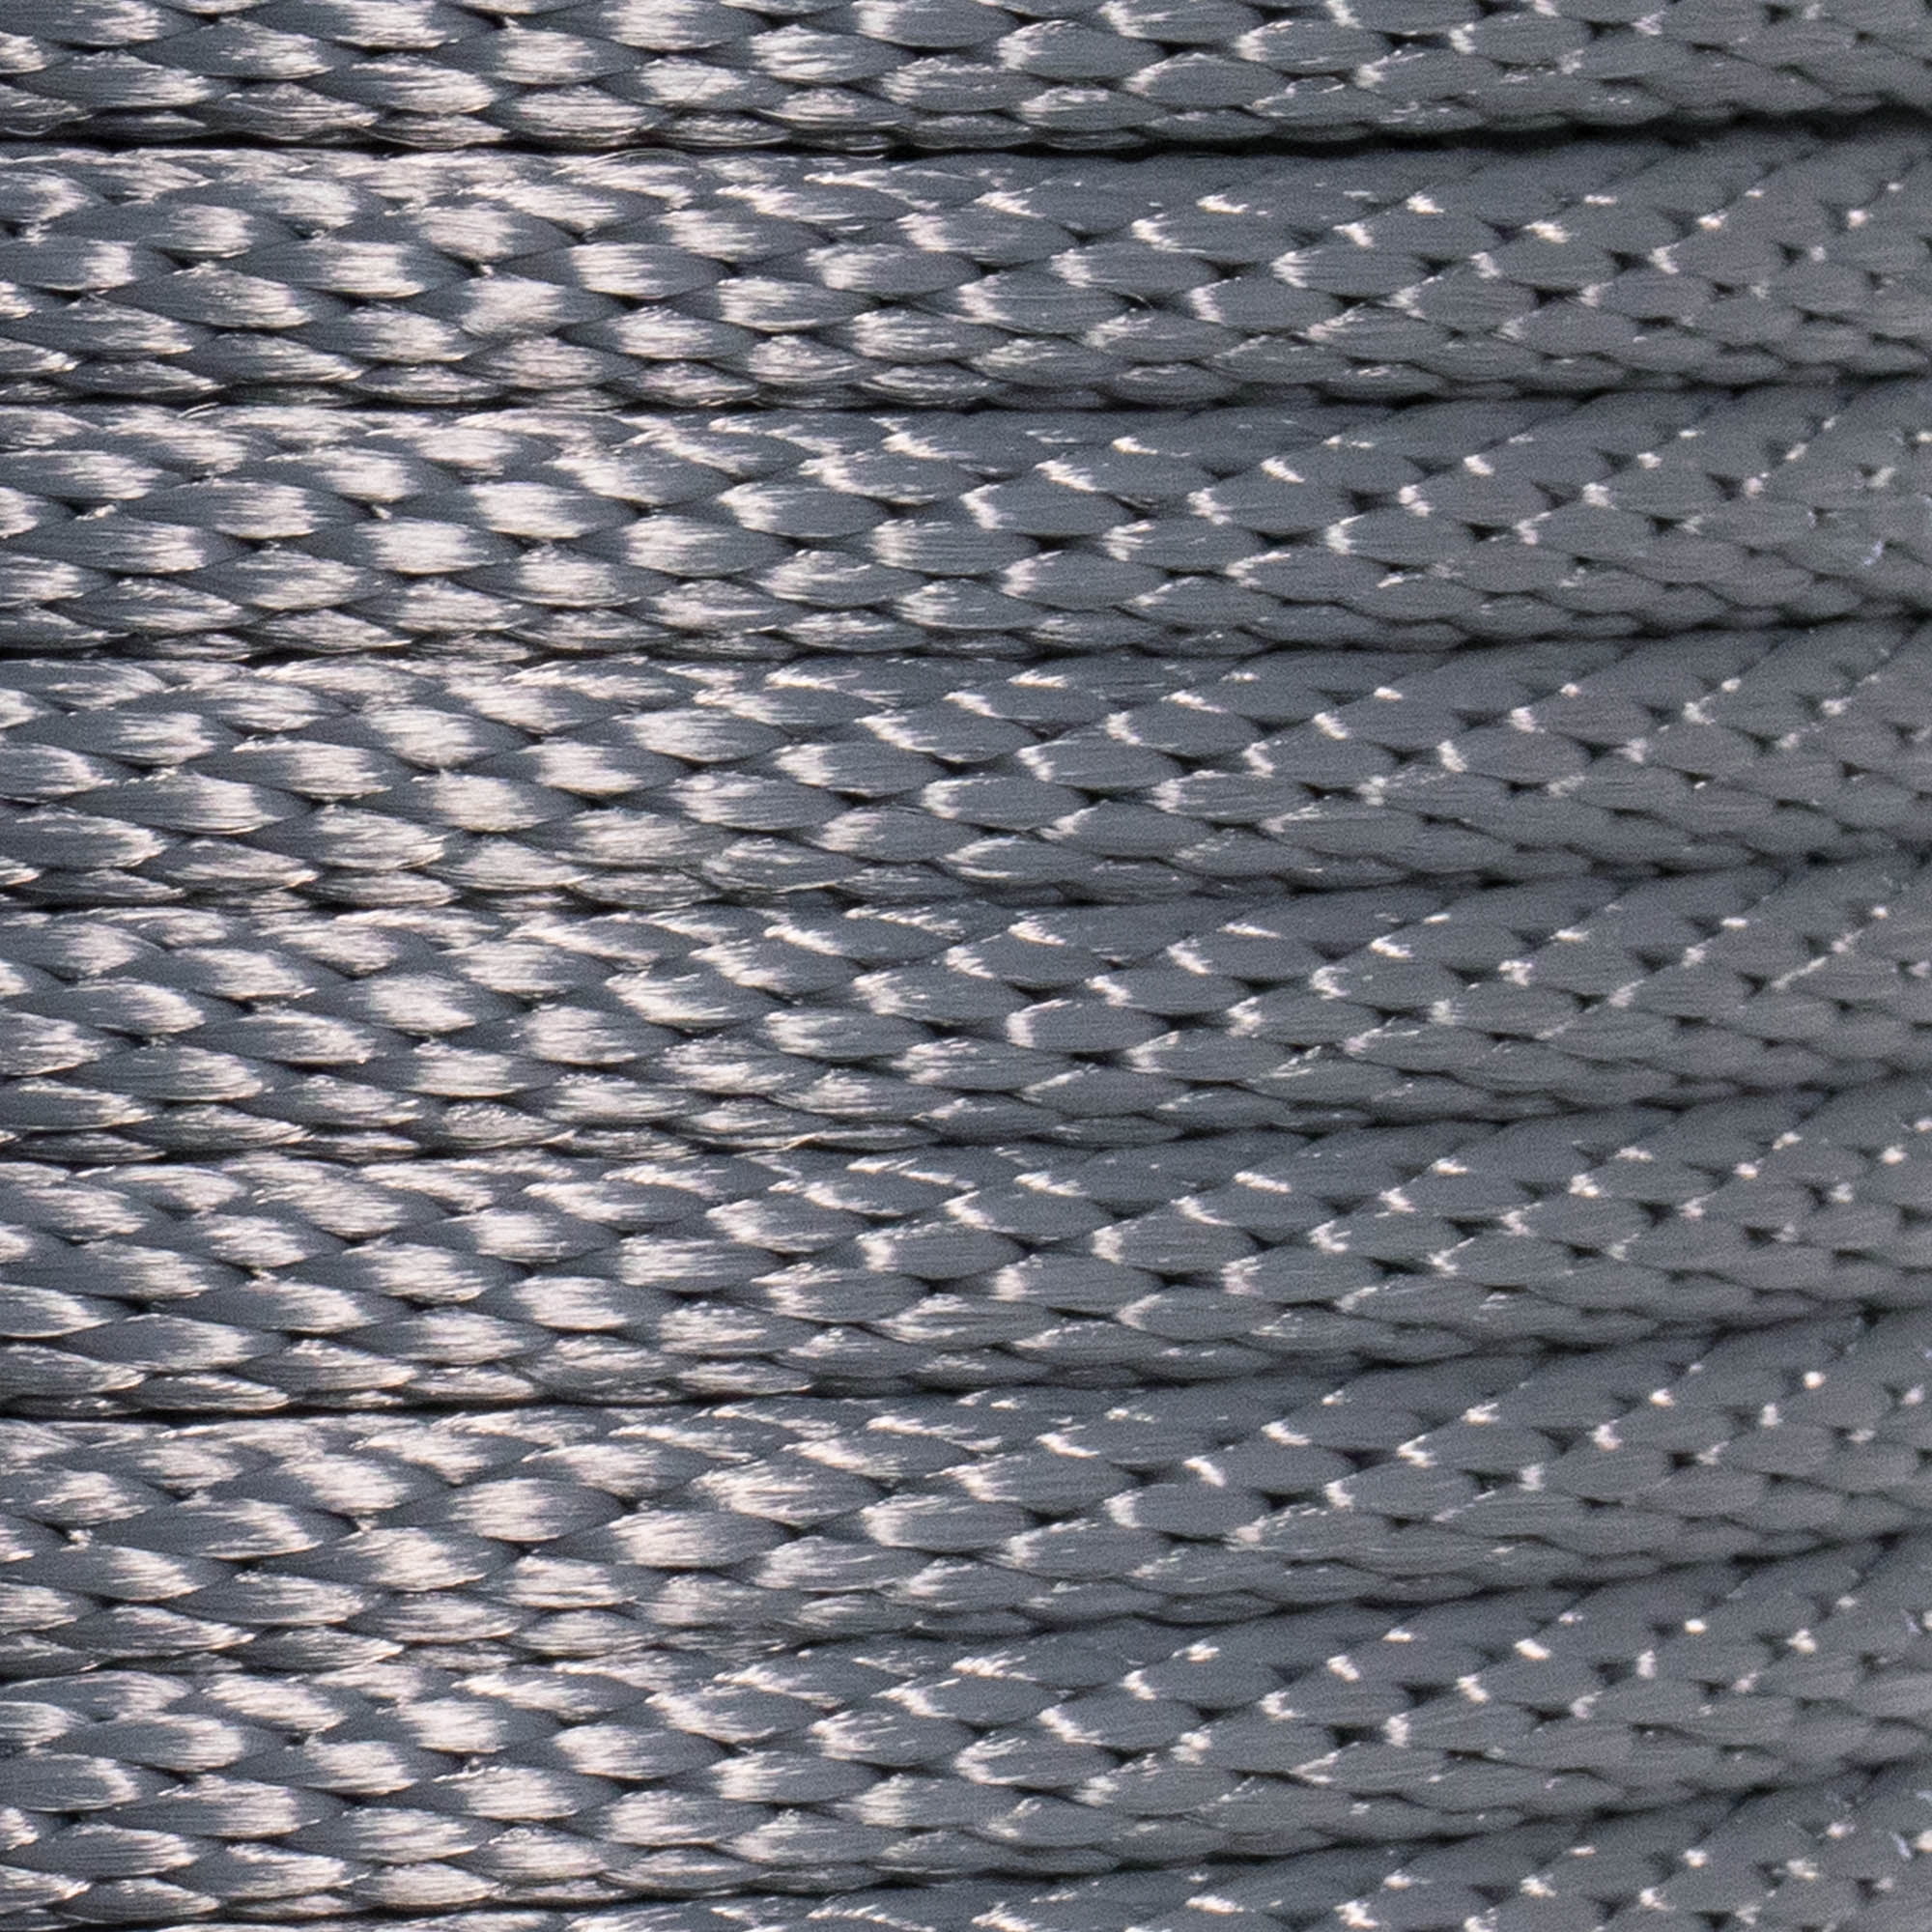 Golberg Braided Nylon Rope with Galvanized Wire Core - High Tensile  Strength Cable Halyard for Flagpoles - 3/8 Inch x 50 Feet